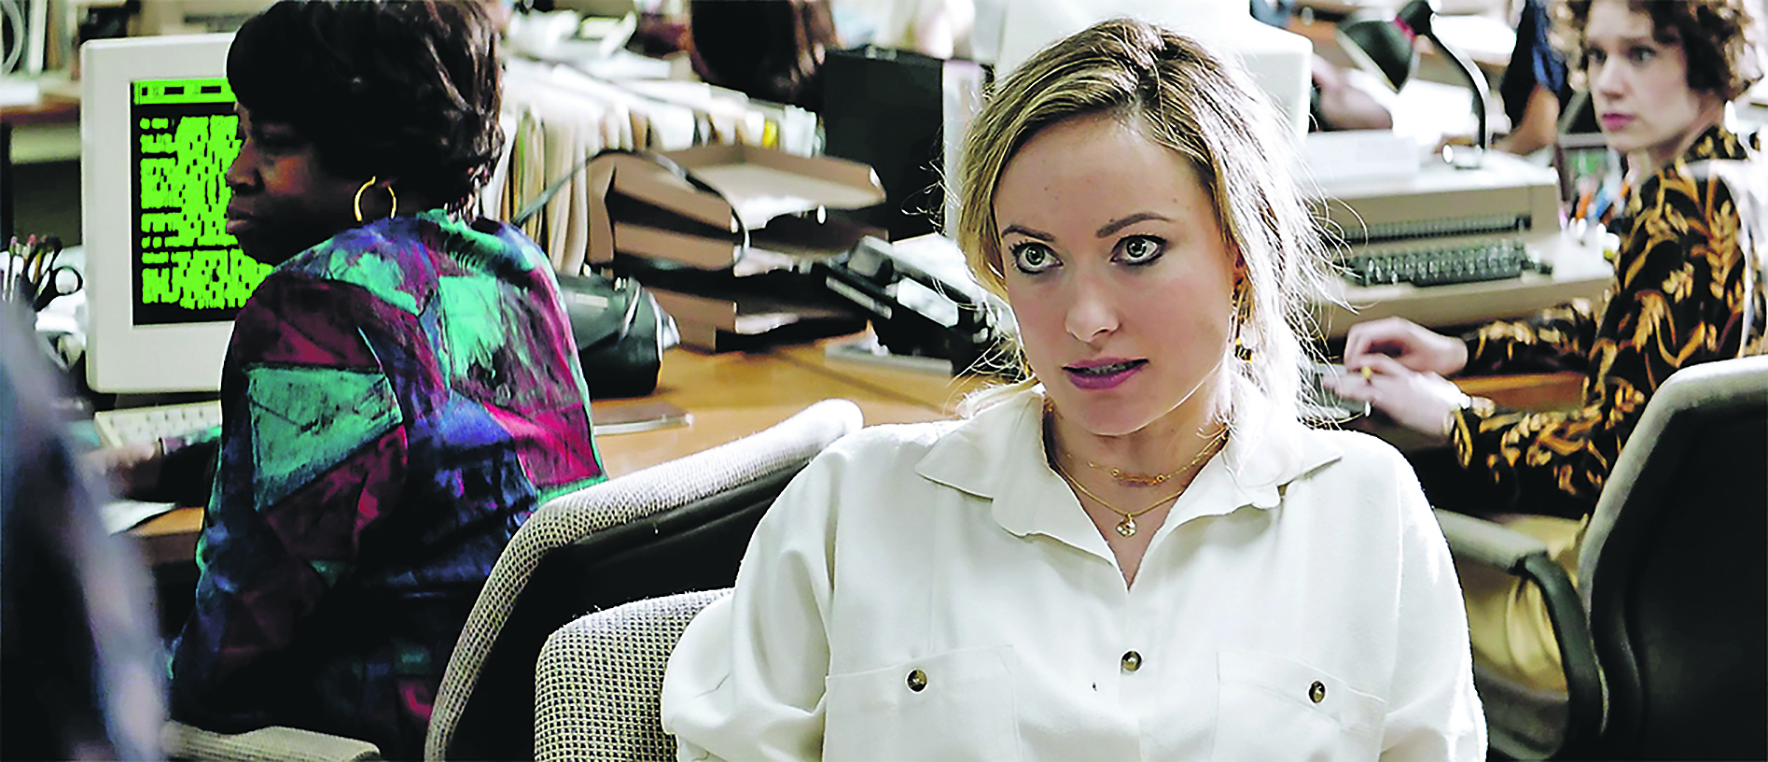 USA. Olivia Wilde  in a scene from the ©Warner Bros new movie: Richard Jewell (2019).
Plot: American security guard, Richard Jewell (Paul Walter Hauser), heroically saves thousands of lives from an exploding bomb at the 1996 Olympics, but is unjustly vilified by journalists and the press who falsely report that he was a terrorist., Image: 478303581, License: Rights-managed, Restrictions: Supplied by Landmark Media. Editorial Only. Landmark Media is not the copyright owner of these Film or TV stills but provides a service only for recognised Media outlets., Model Release: no, Credit line: Supplied by LMK / Landmark / Profimedia